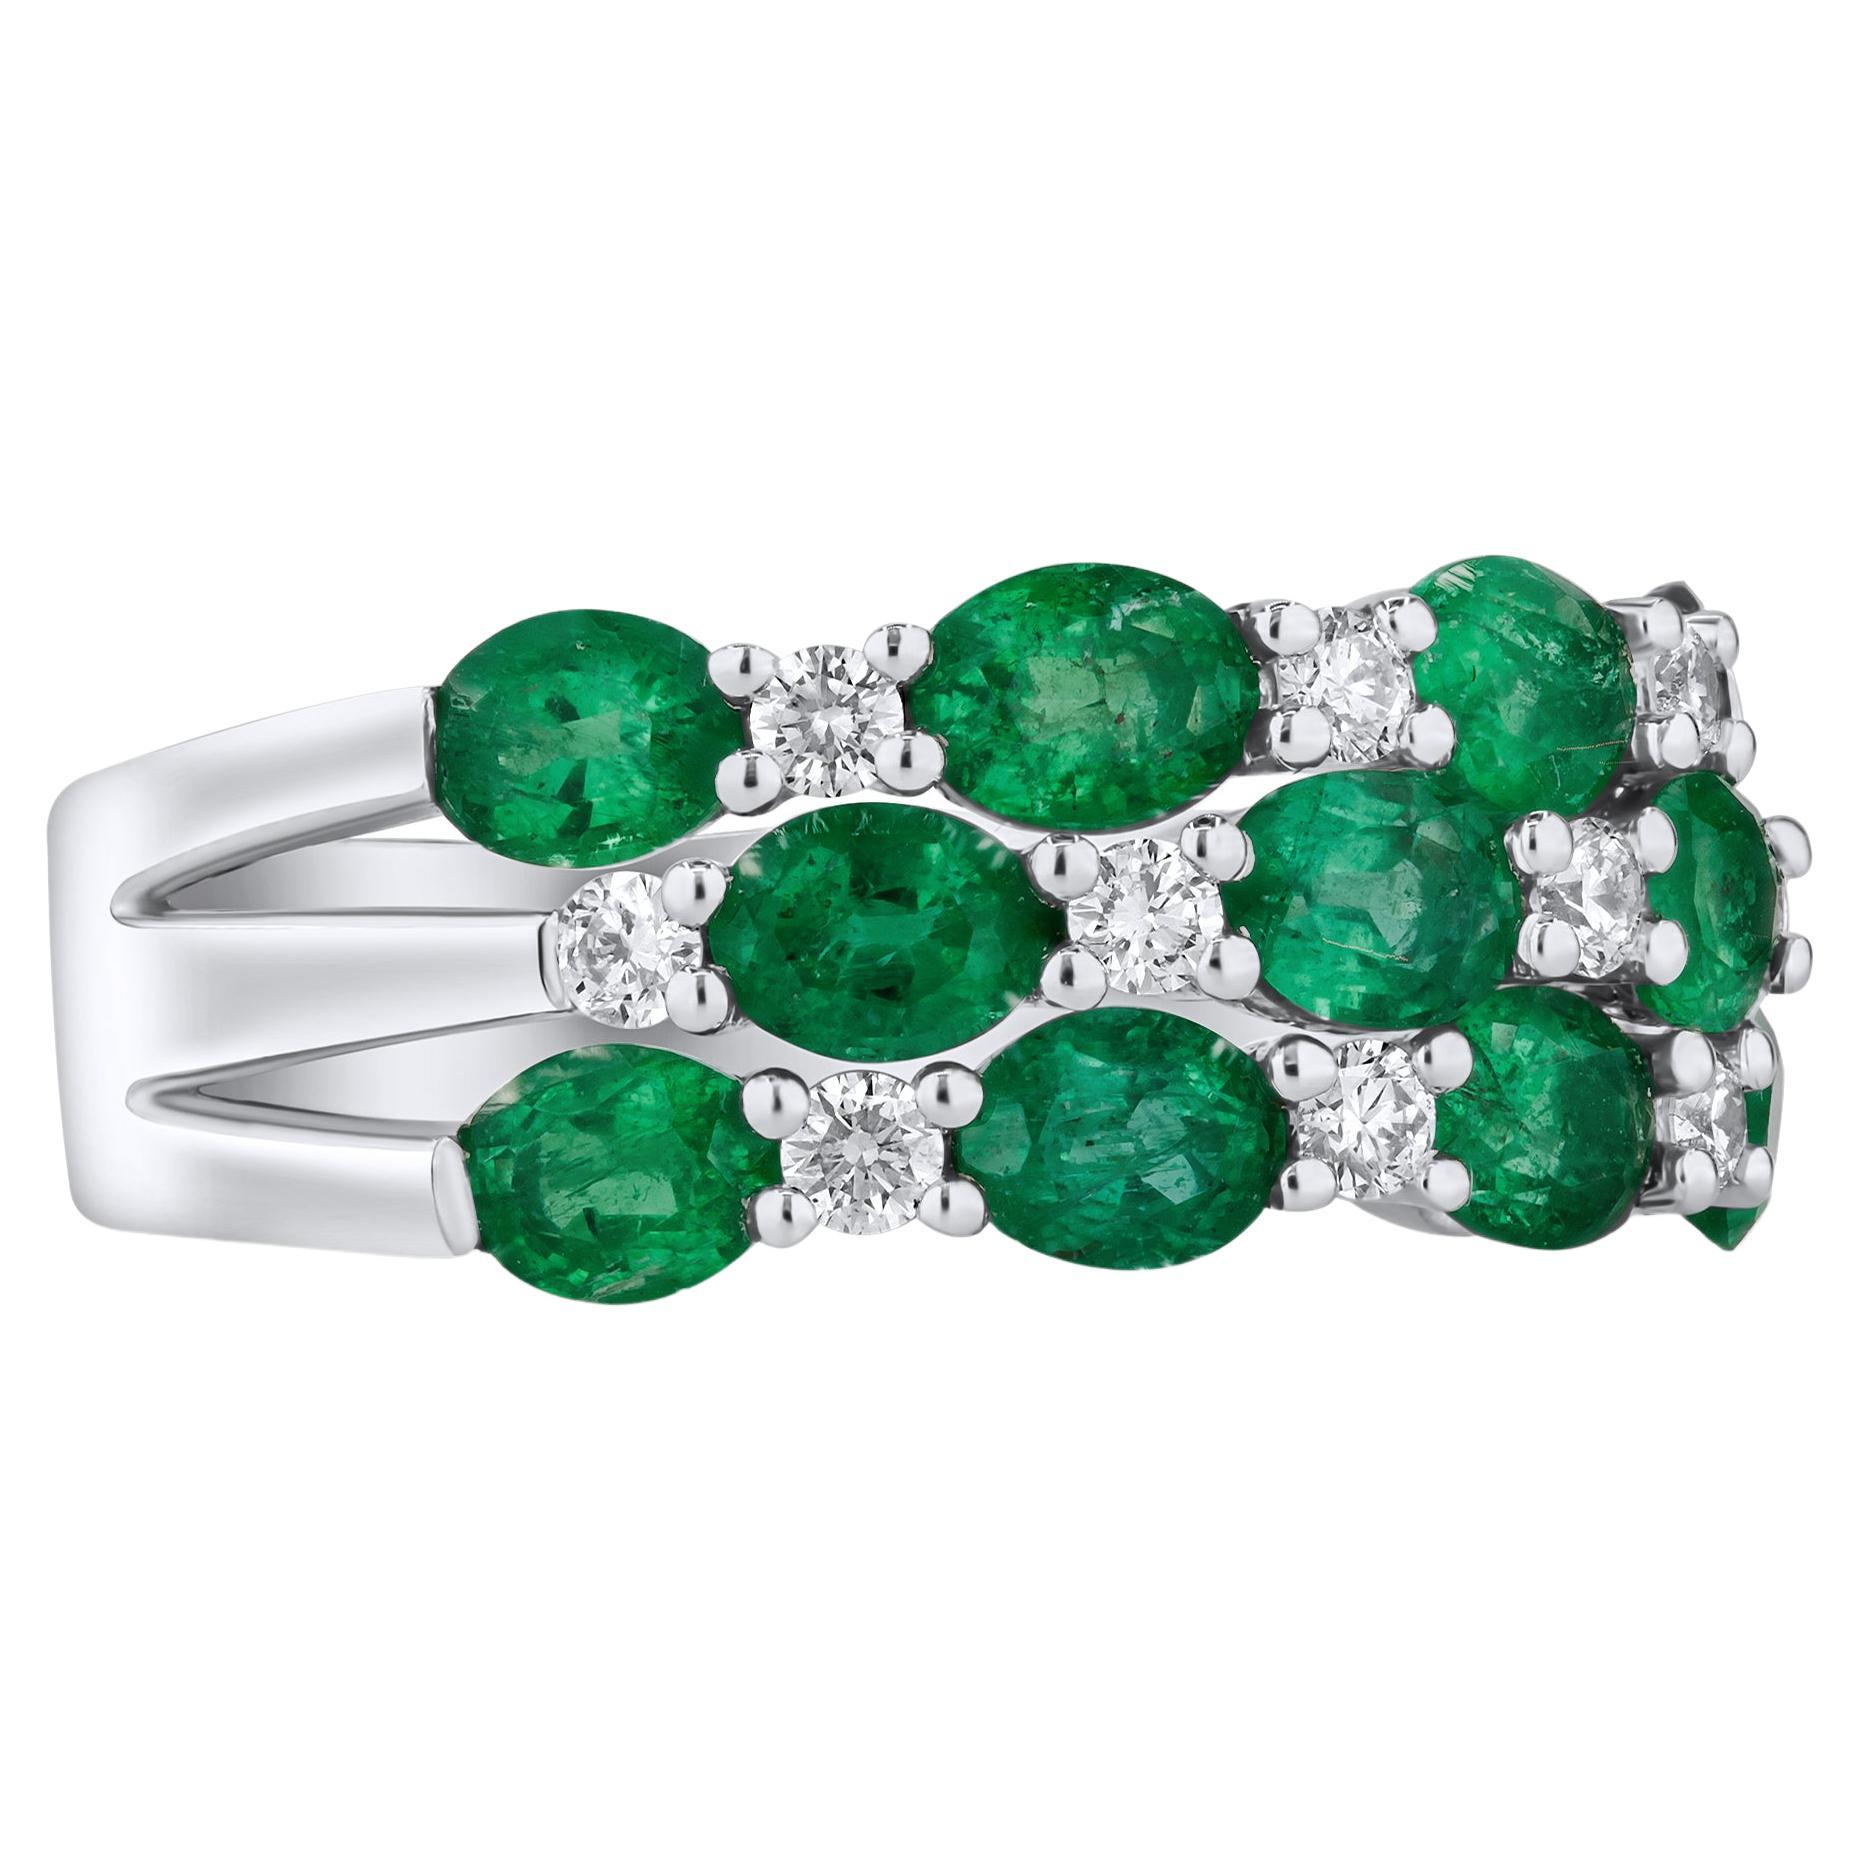 2.20 Carat Oval Emerald and 0.29 Carat Diamond Checkerboard Ring in 14W ref1656